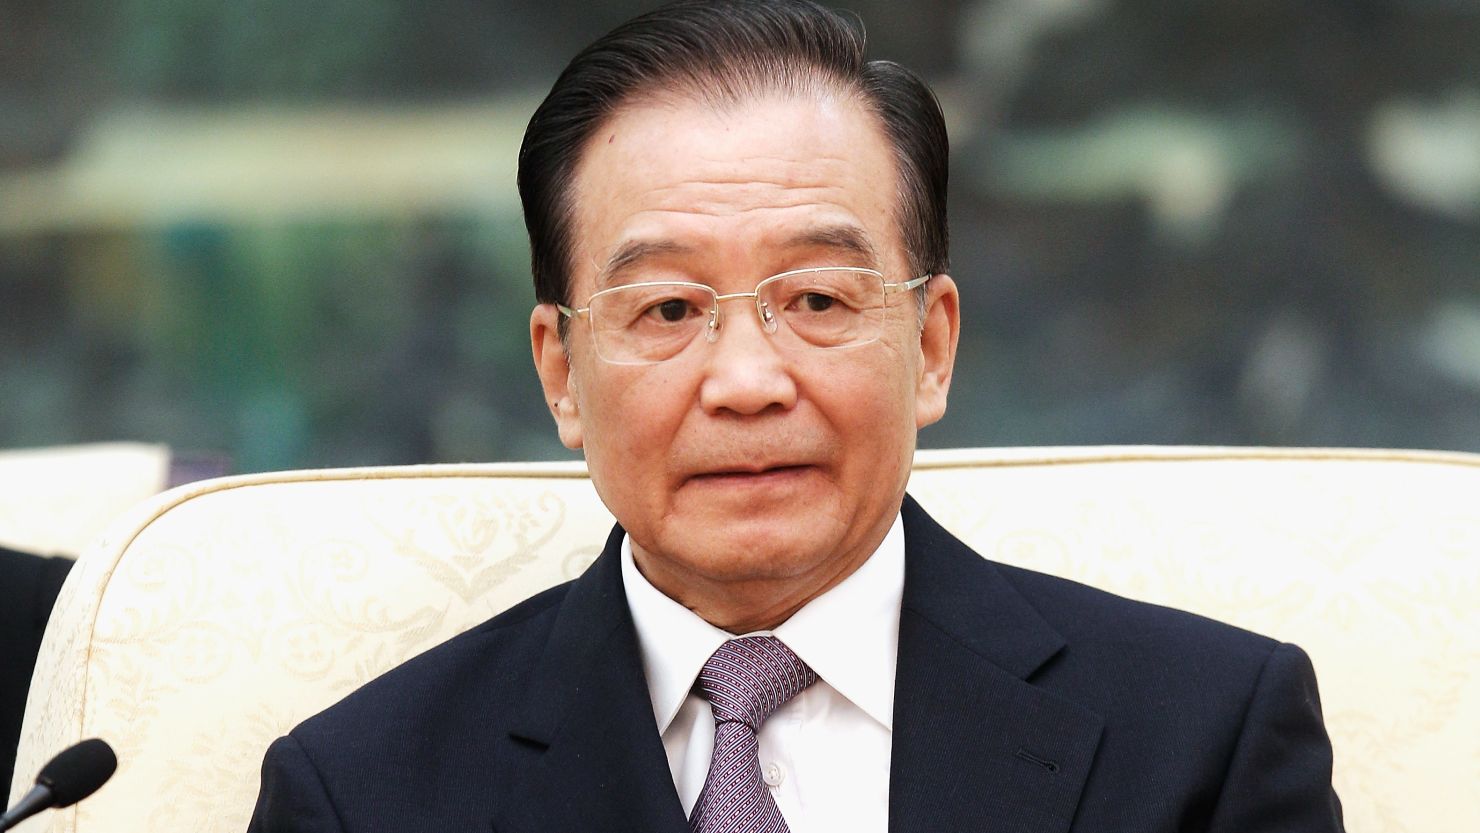  Prime Minister Wen Jiabao endorsed bolder financial reforms during a speech on Chinese radio.